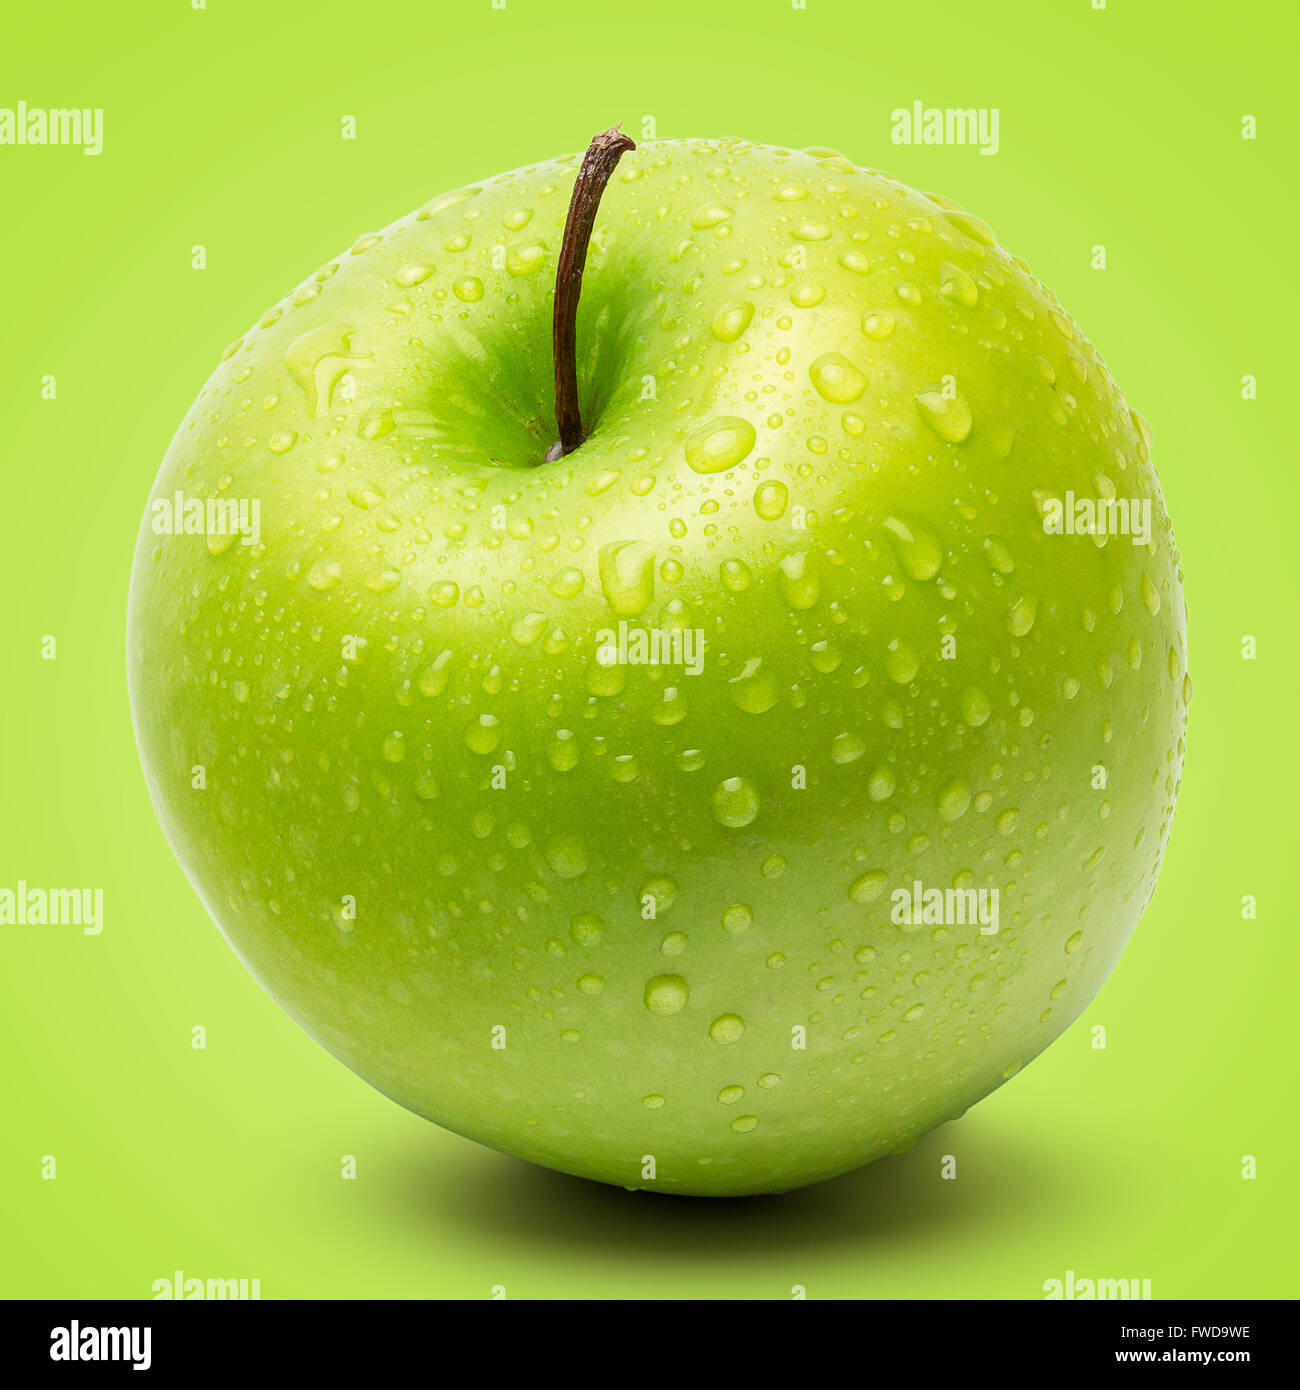 Perfect Fresh Green Apple Isolated on Green Background in Full Depth of Field. Stock Photo